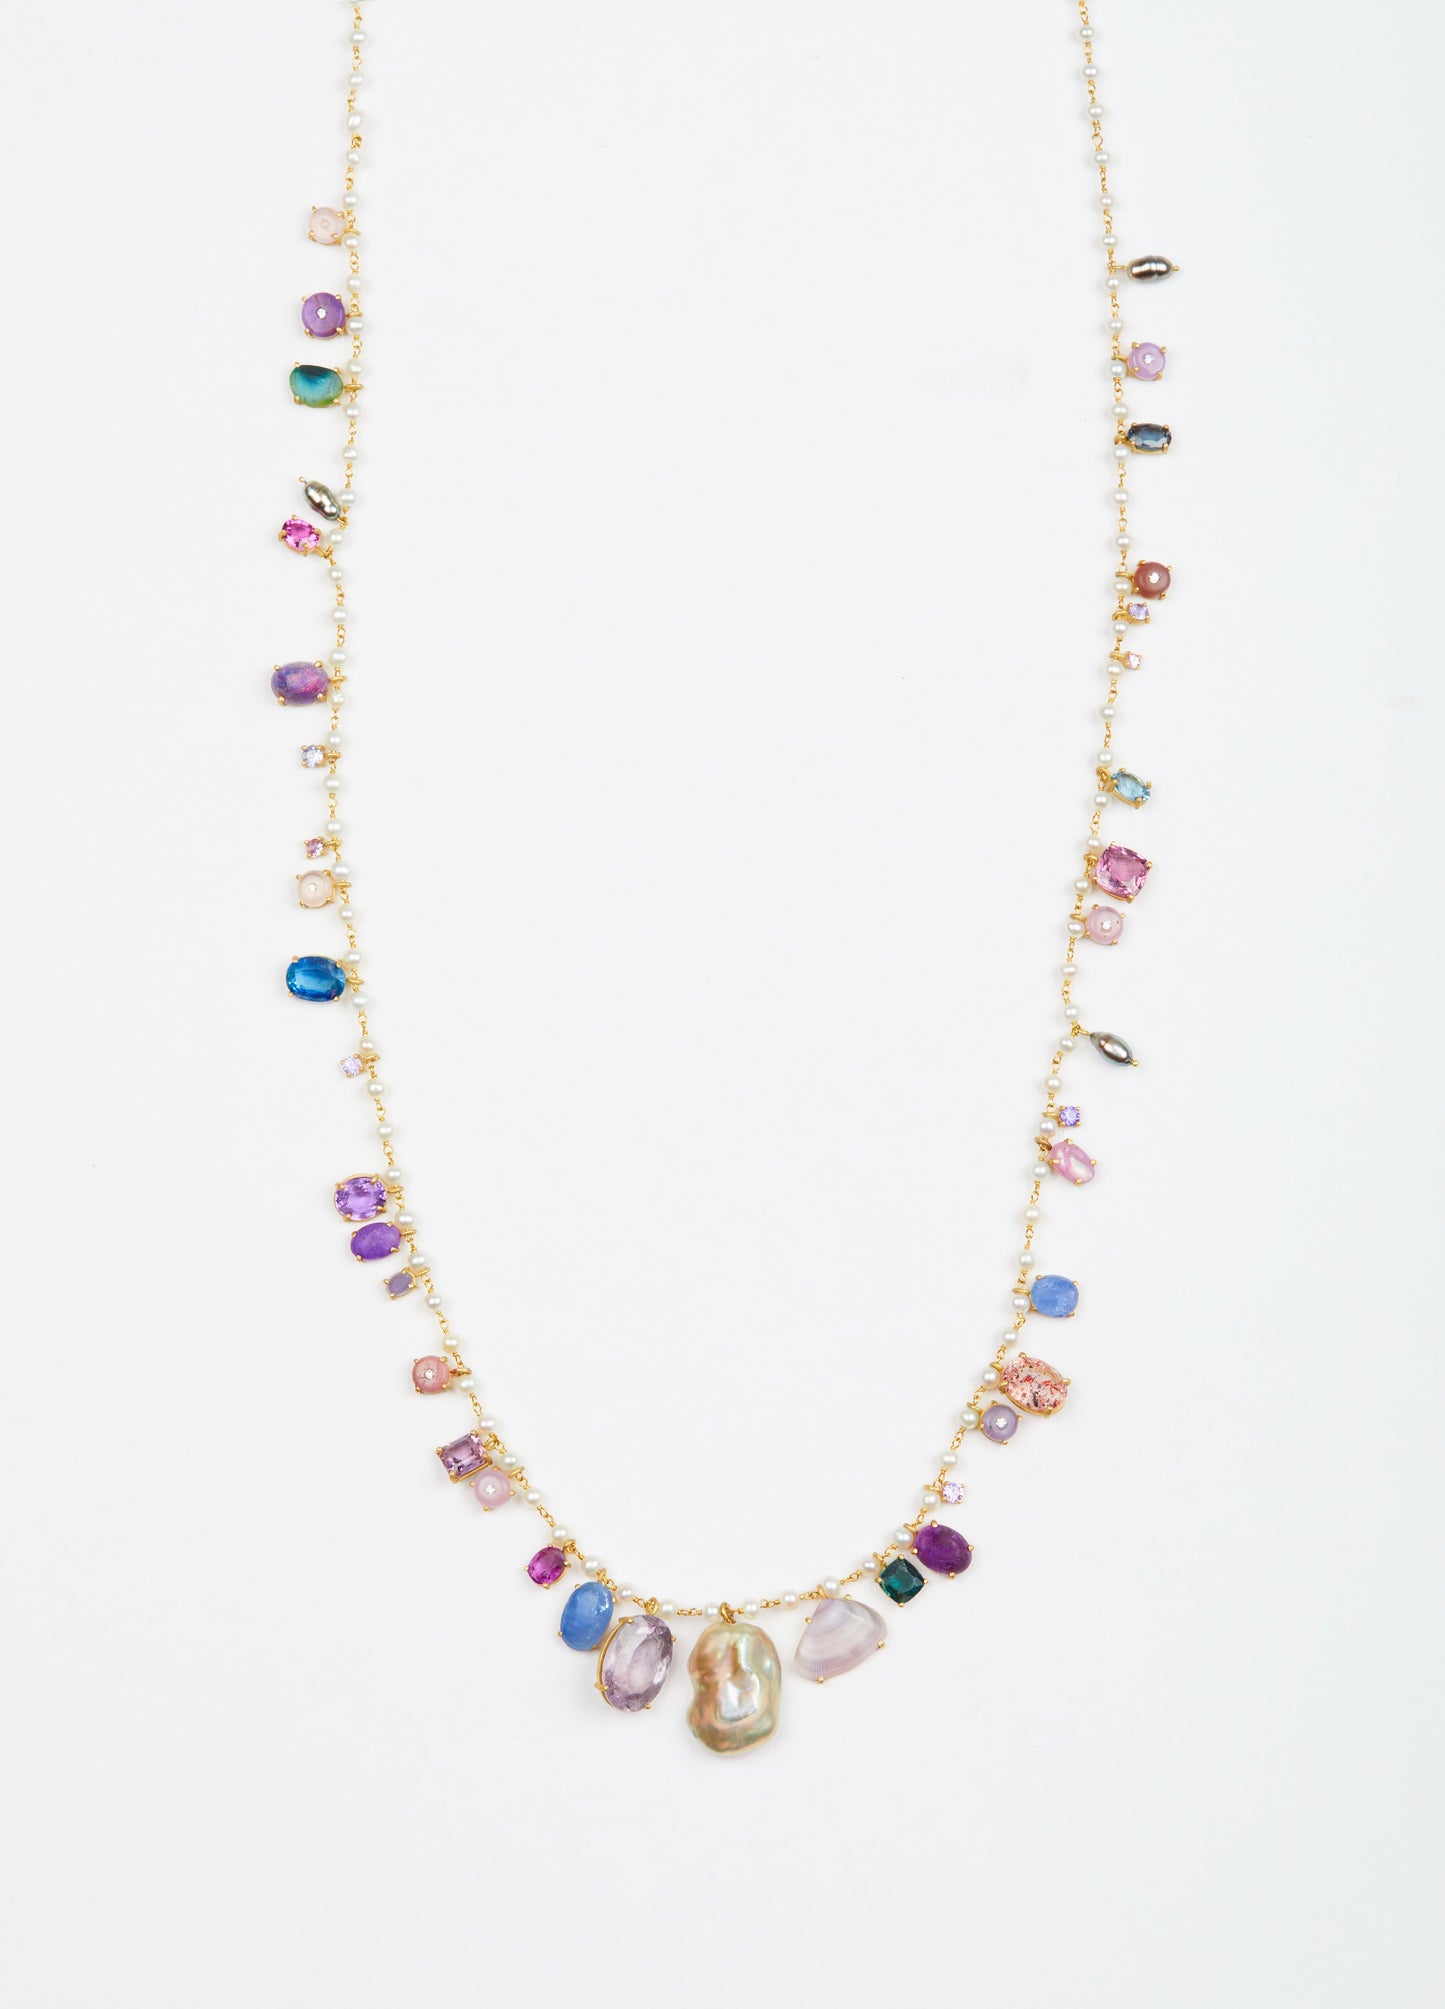 Pearl Chain with Multi Gems, Pearls, Diamonds and Shells